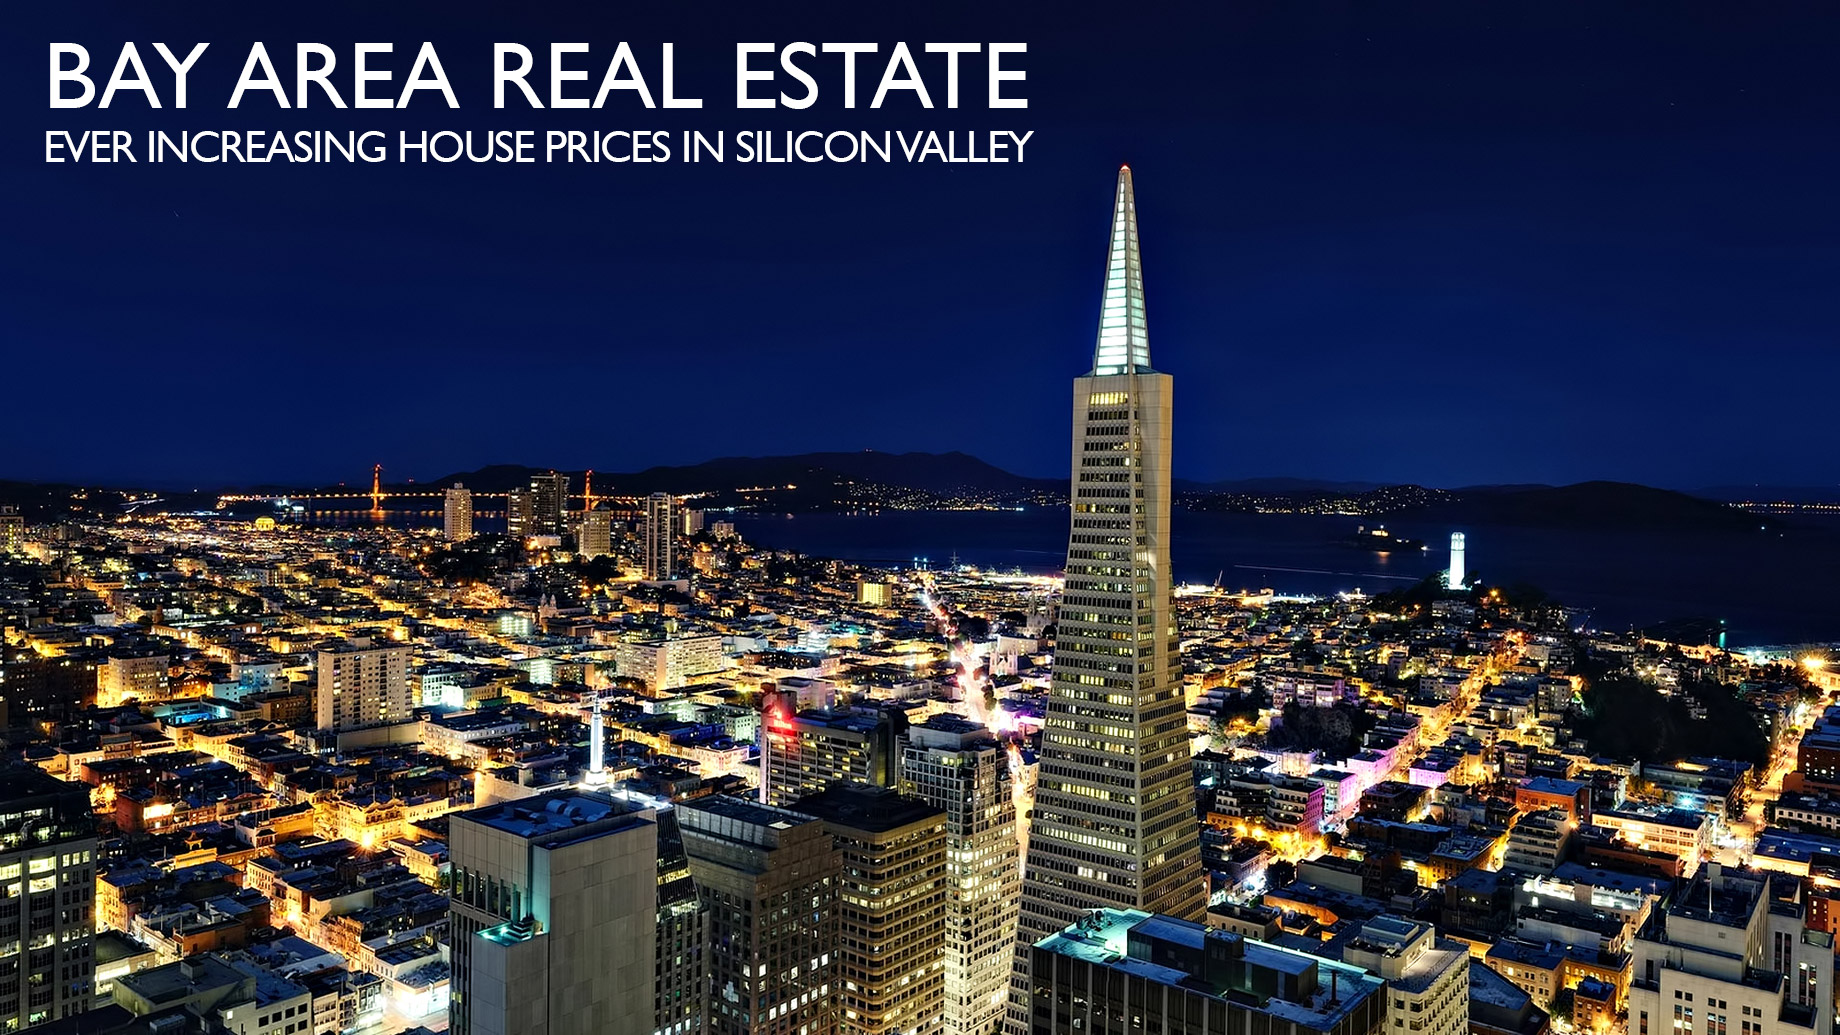 Bay Area Real Estate - Ever Increasing House Prices in Silicon Valley